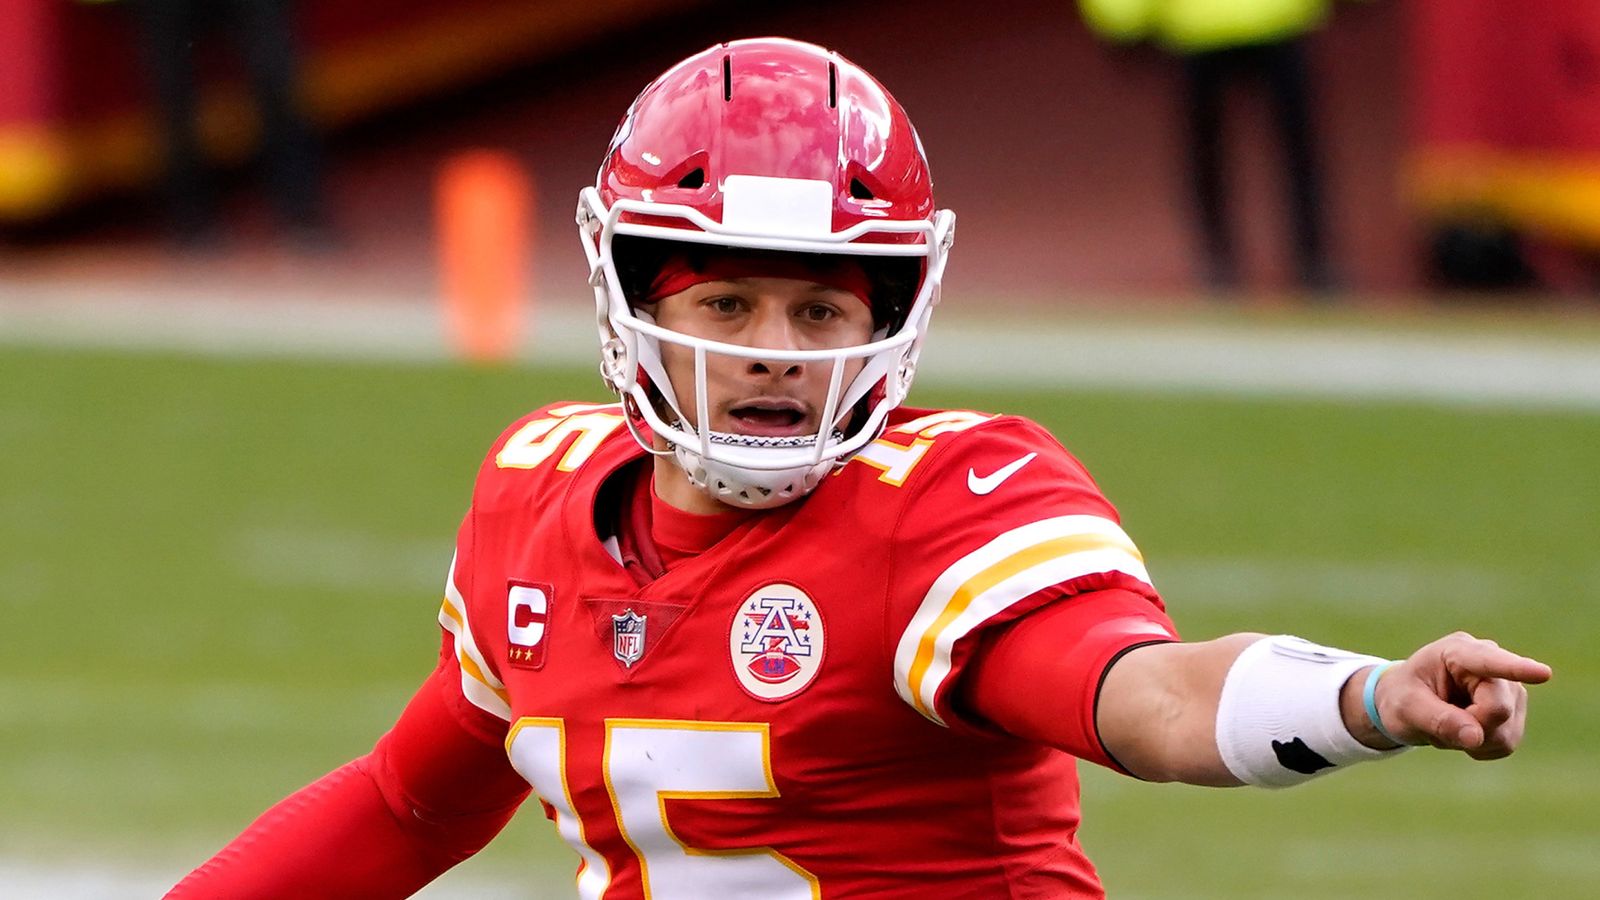 Watch This Pit Stop Celebration by the NFLs Kansas City 